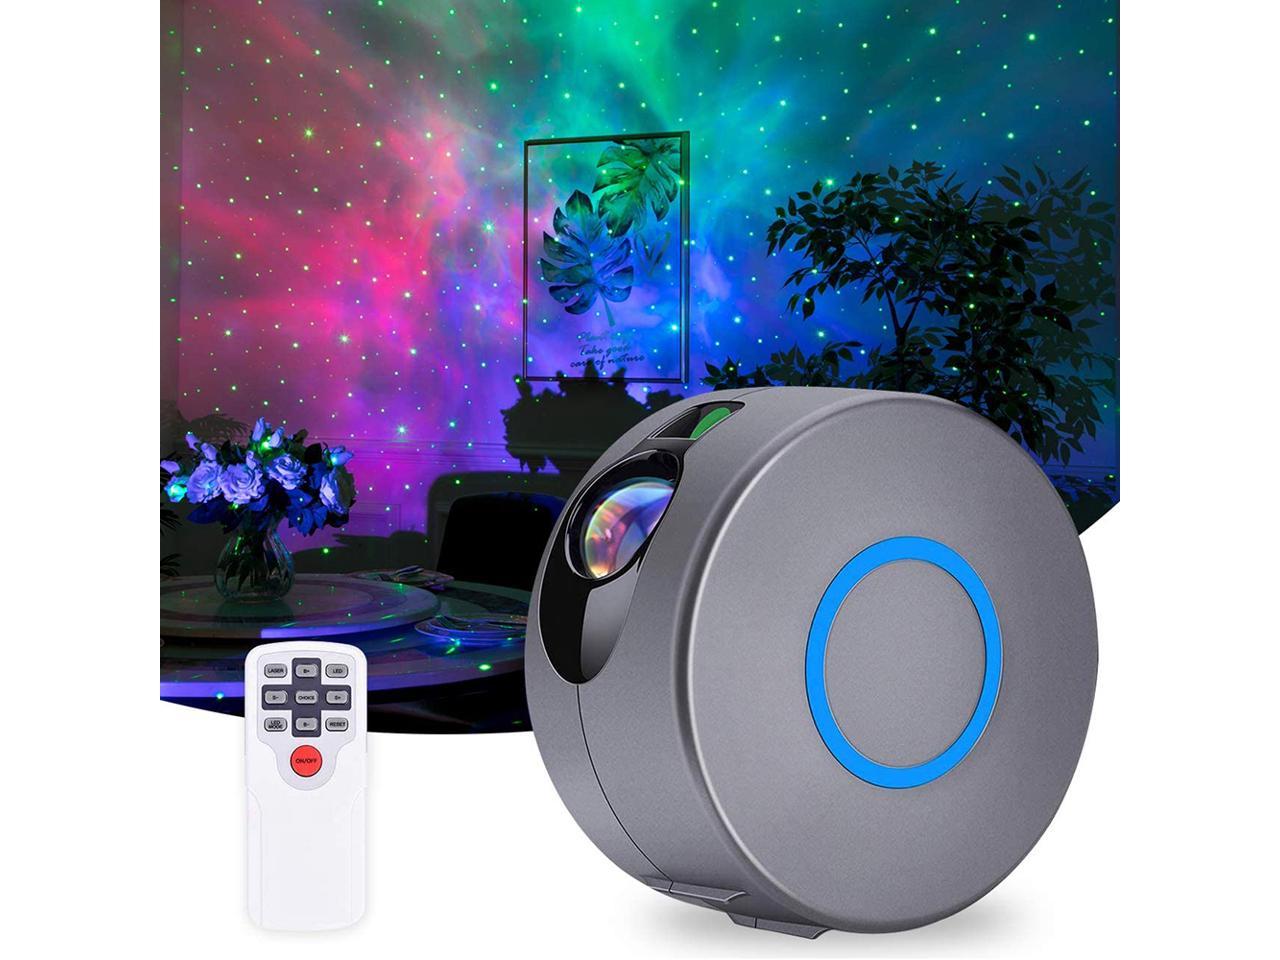 Chims Aurora Starry Lighting Nebula Projector Artificial Universe Decoration Mini Portable Laser Light for Kid's Bedroom Party Home Theatre Music Show Birthday Gifts Galaxy Projector 